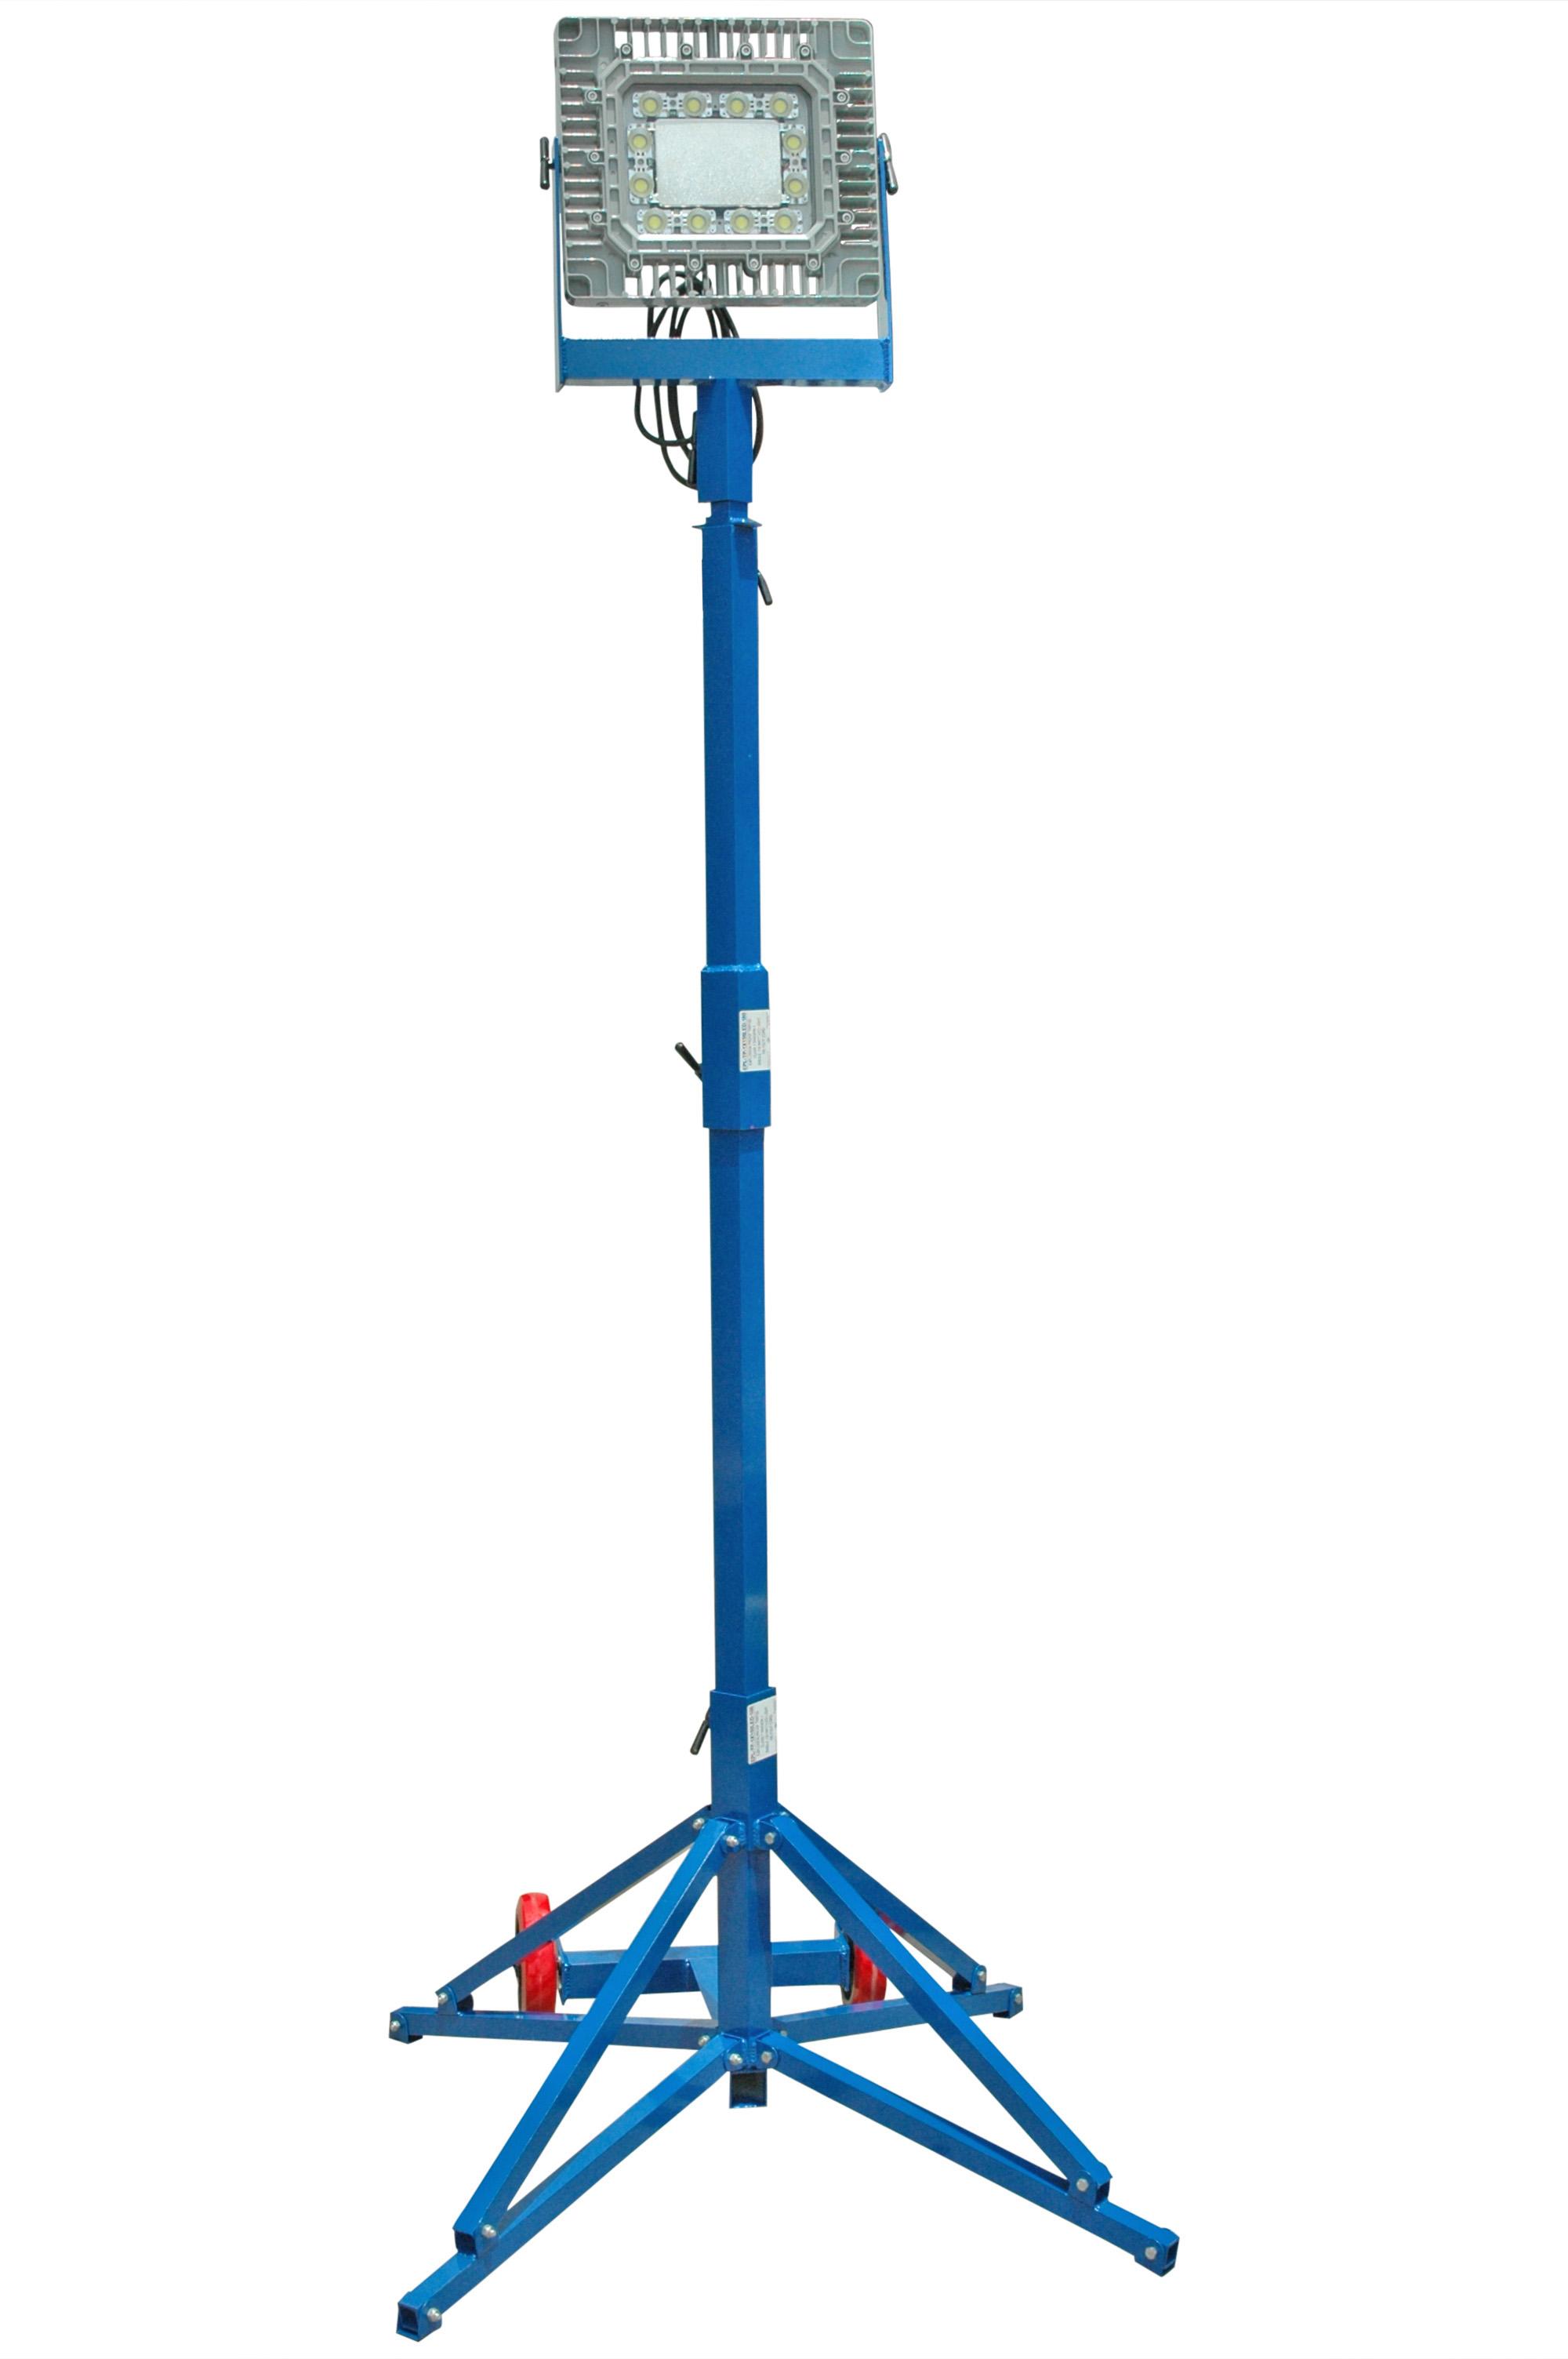 Portable Adjustable Temporary Work Site Light Tower